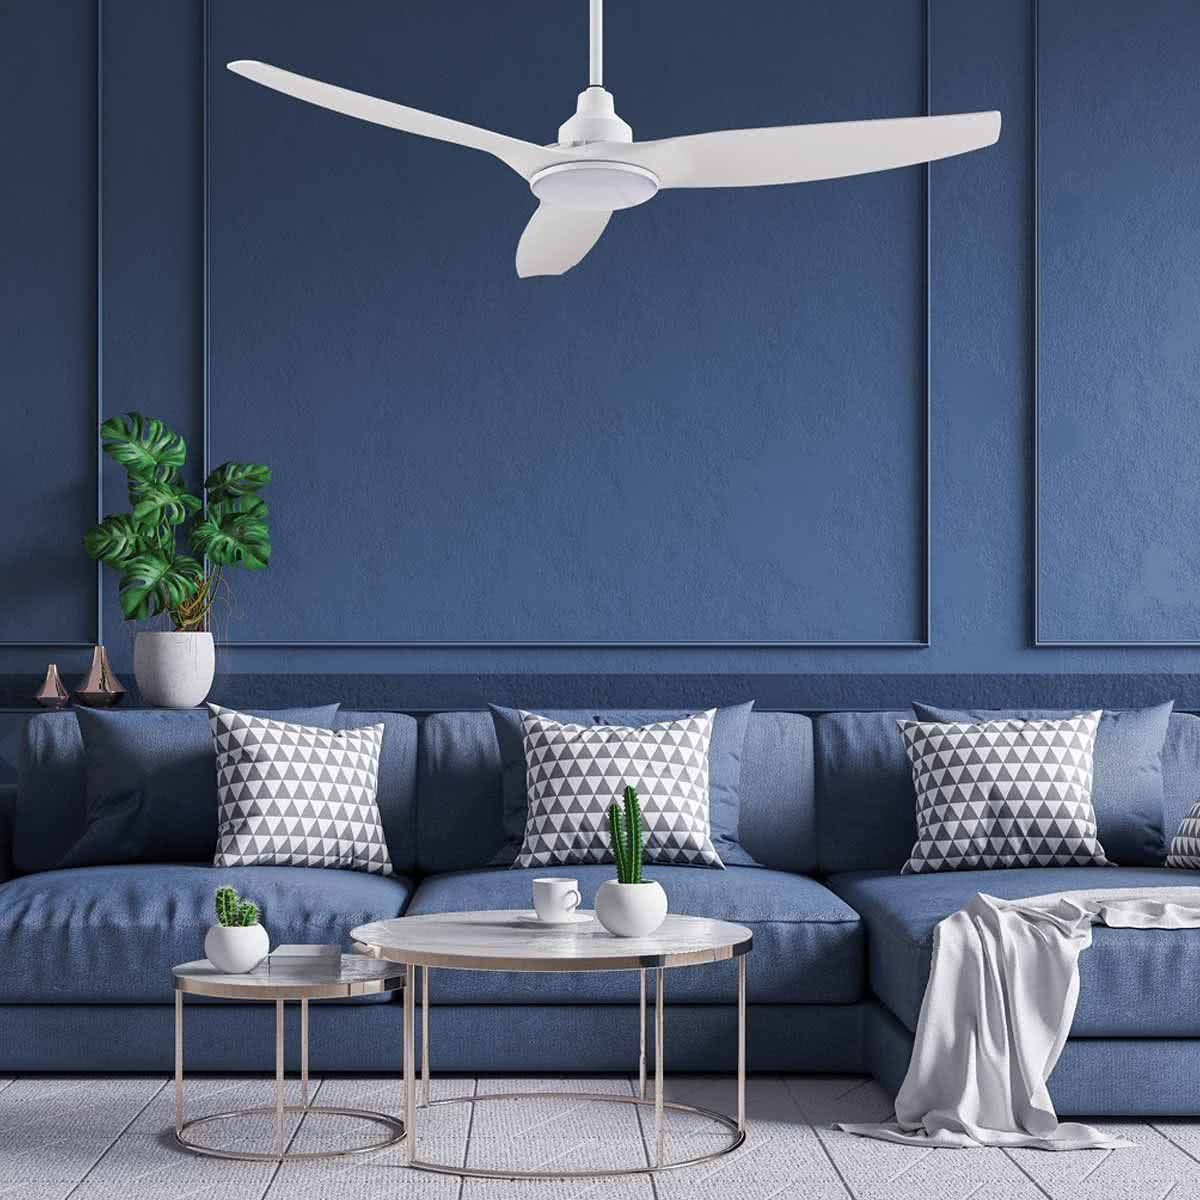 Skyfan 48" Dc 3 Blade Ceiling Fan With 20w LED Tri Colour Light & Remote